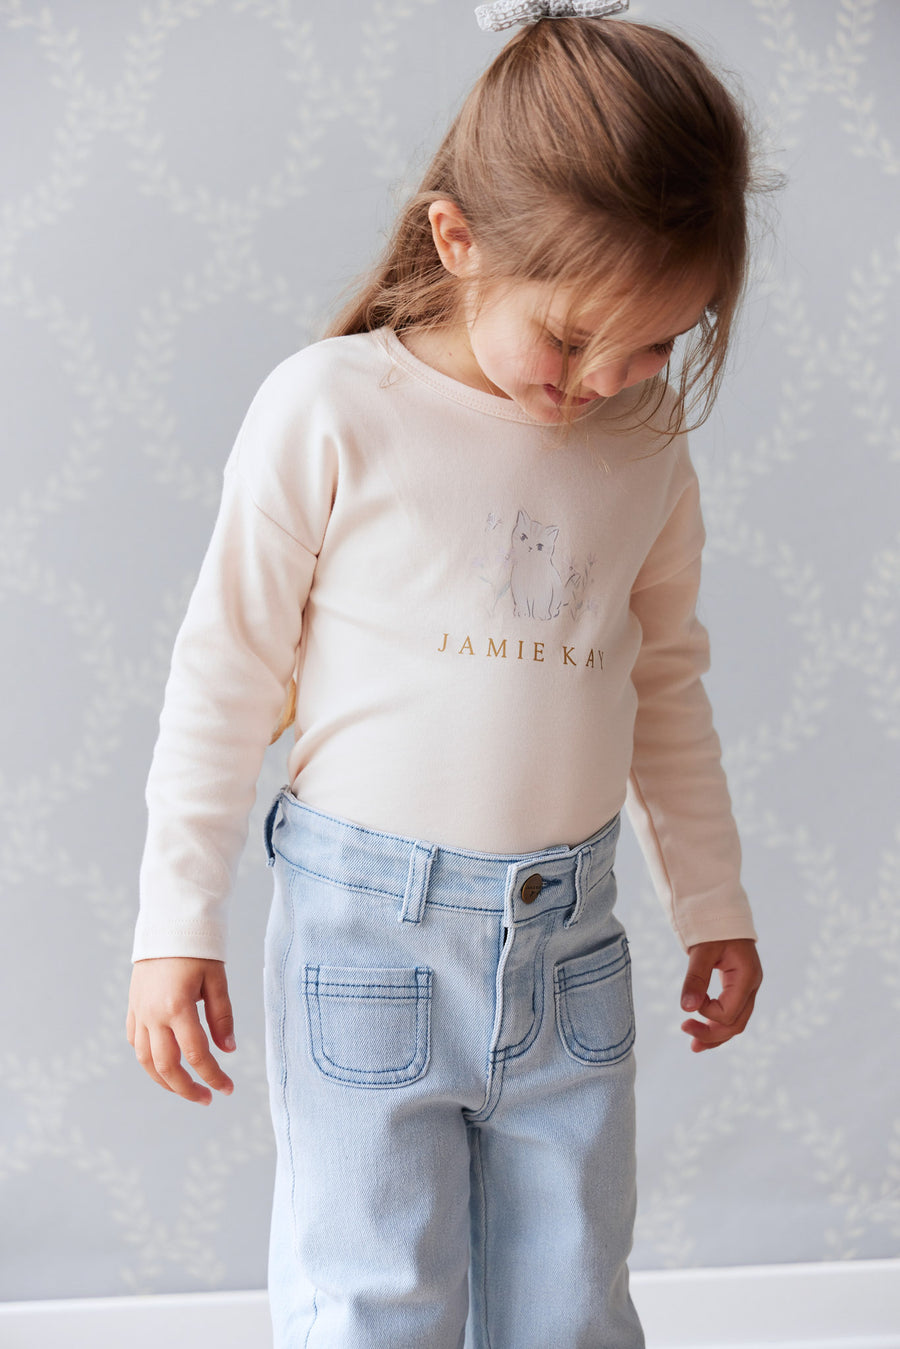 Pima Cotton Marley Long Sleeve Top - Ballet Pink Childrens Top from Jamie Kay NZ